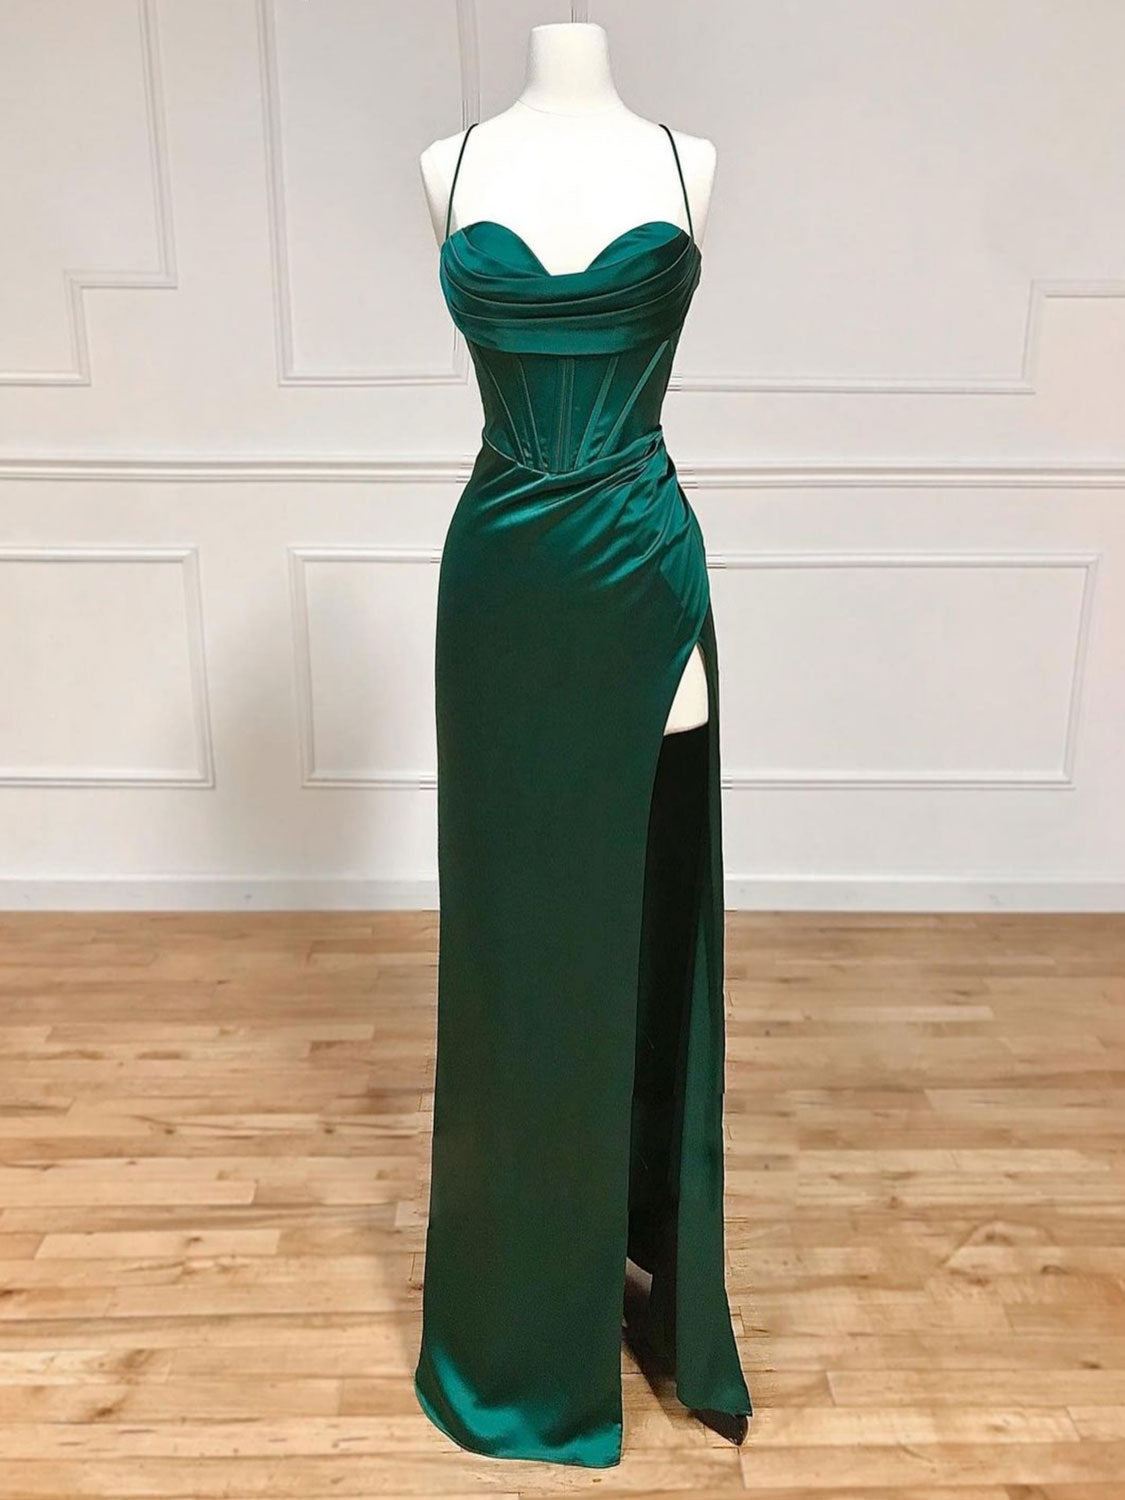 Mermaid Sweetheart Neck Green Long Corset Prom Dress, Green Corset Formal Evening Dress outfit, Prom Dresses 2029 Black